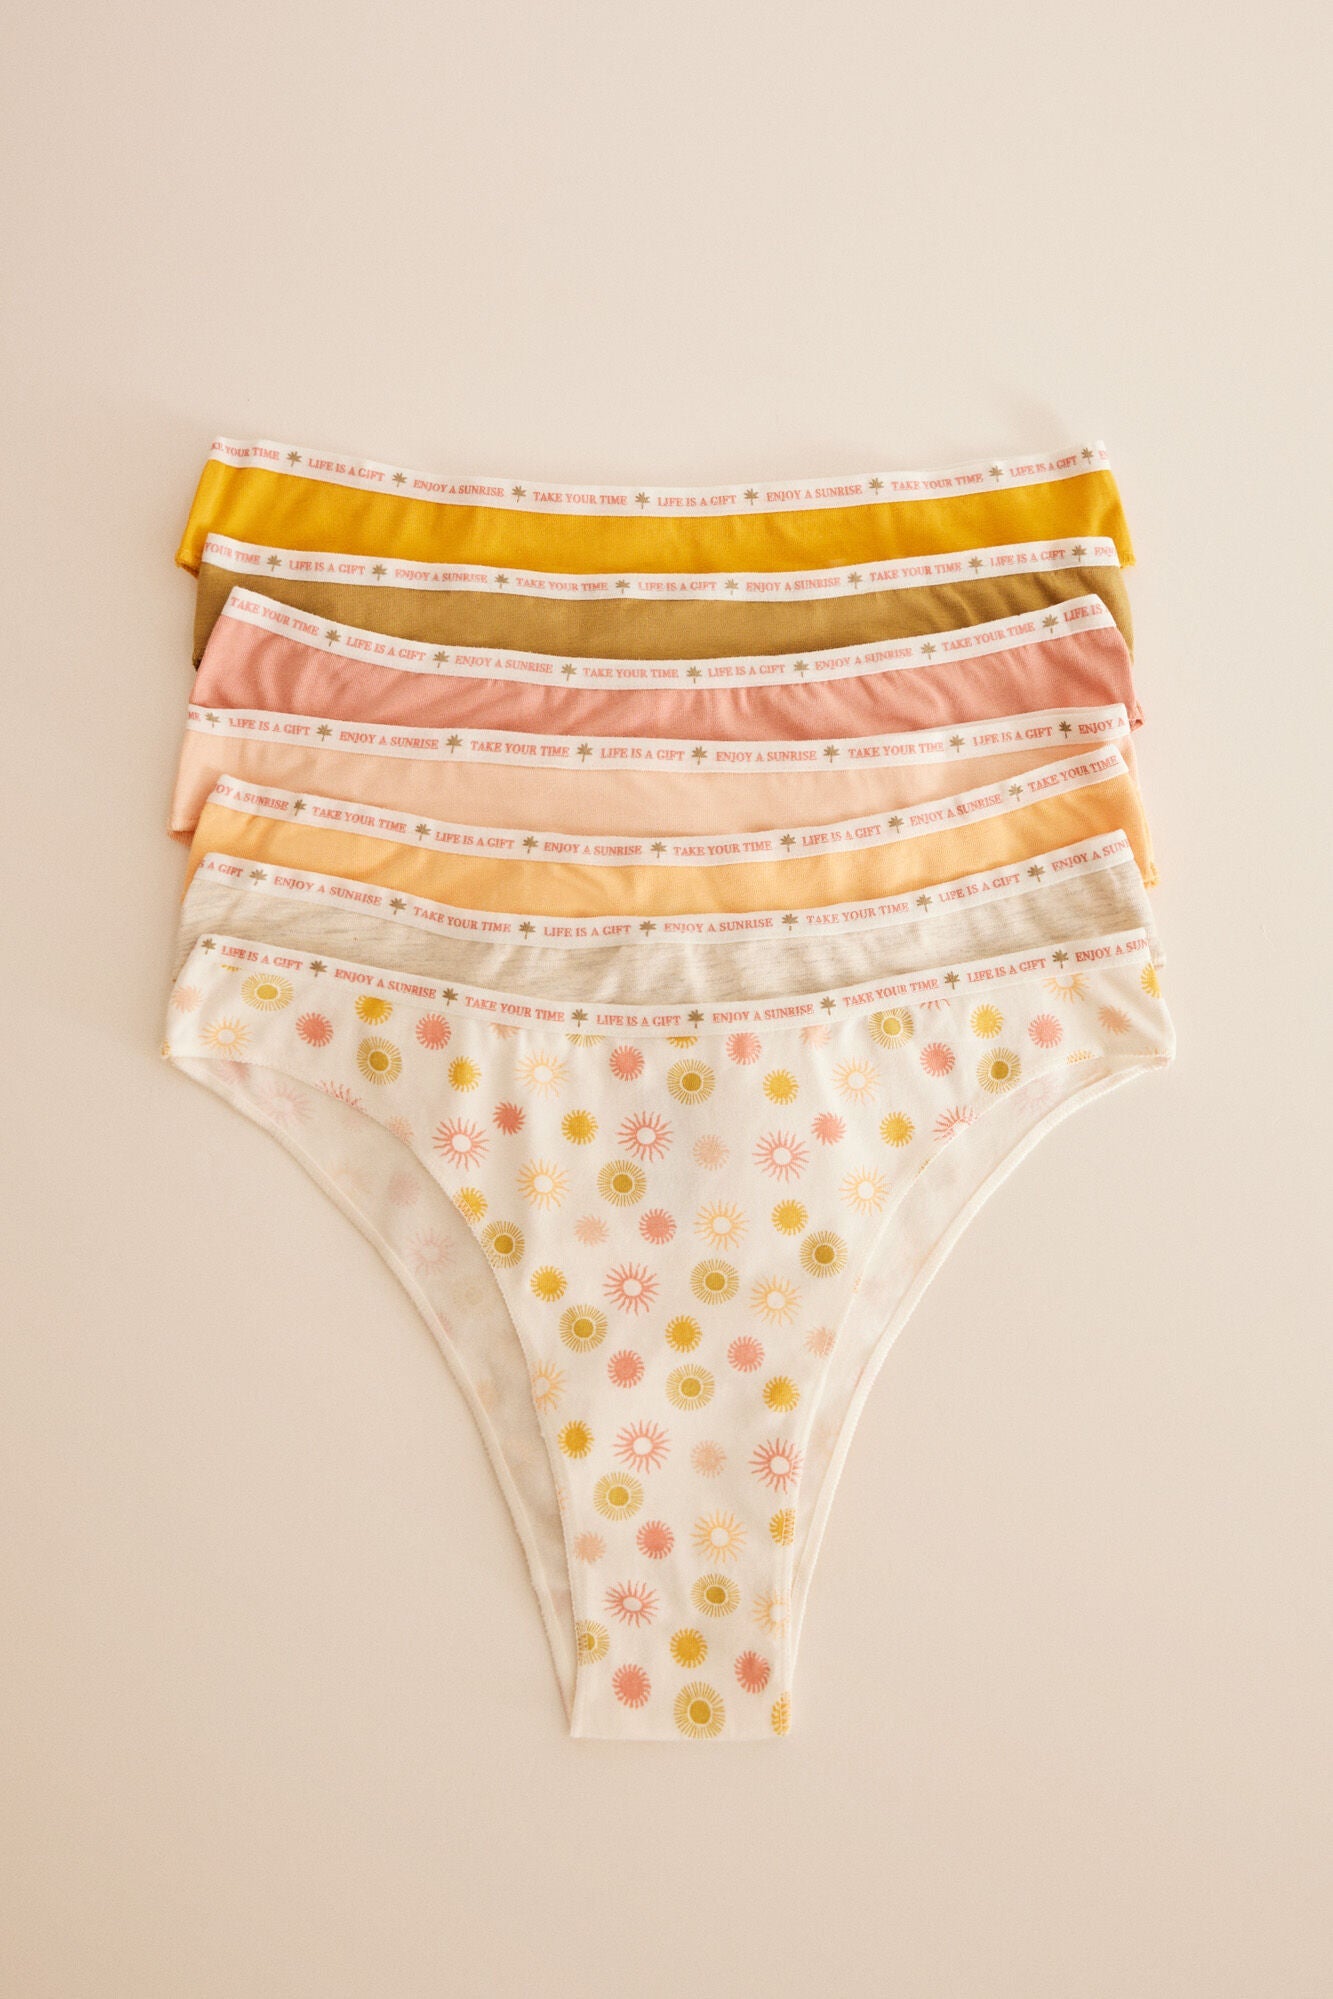 Pack of 7 Brazilian cotton panties with message